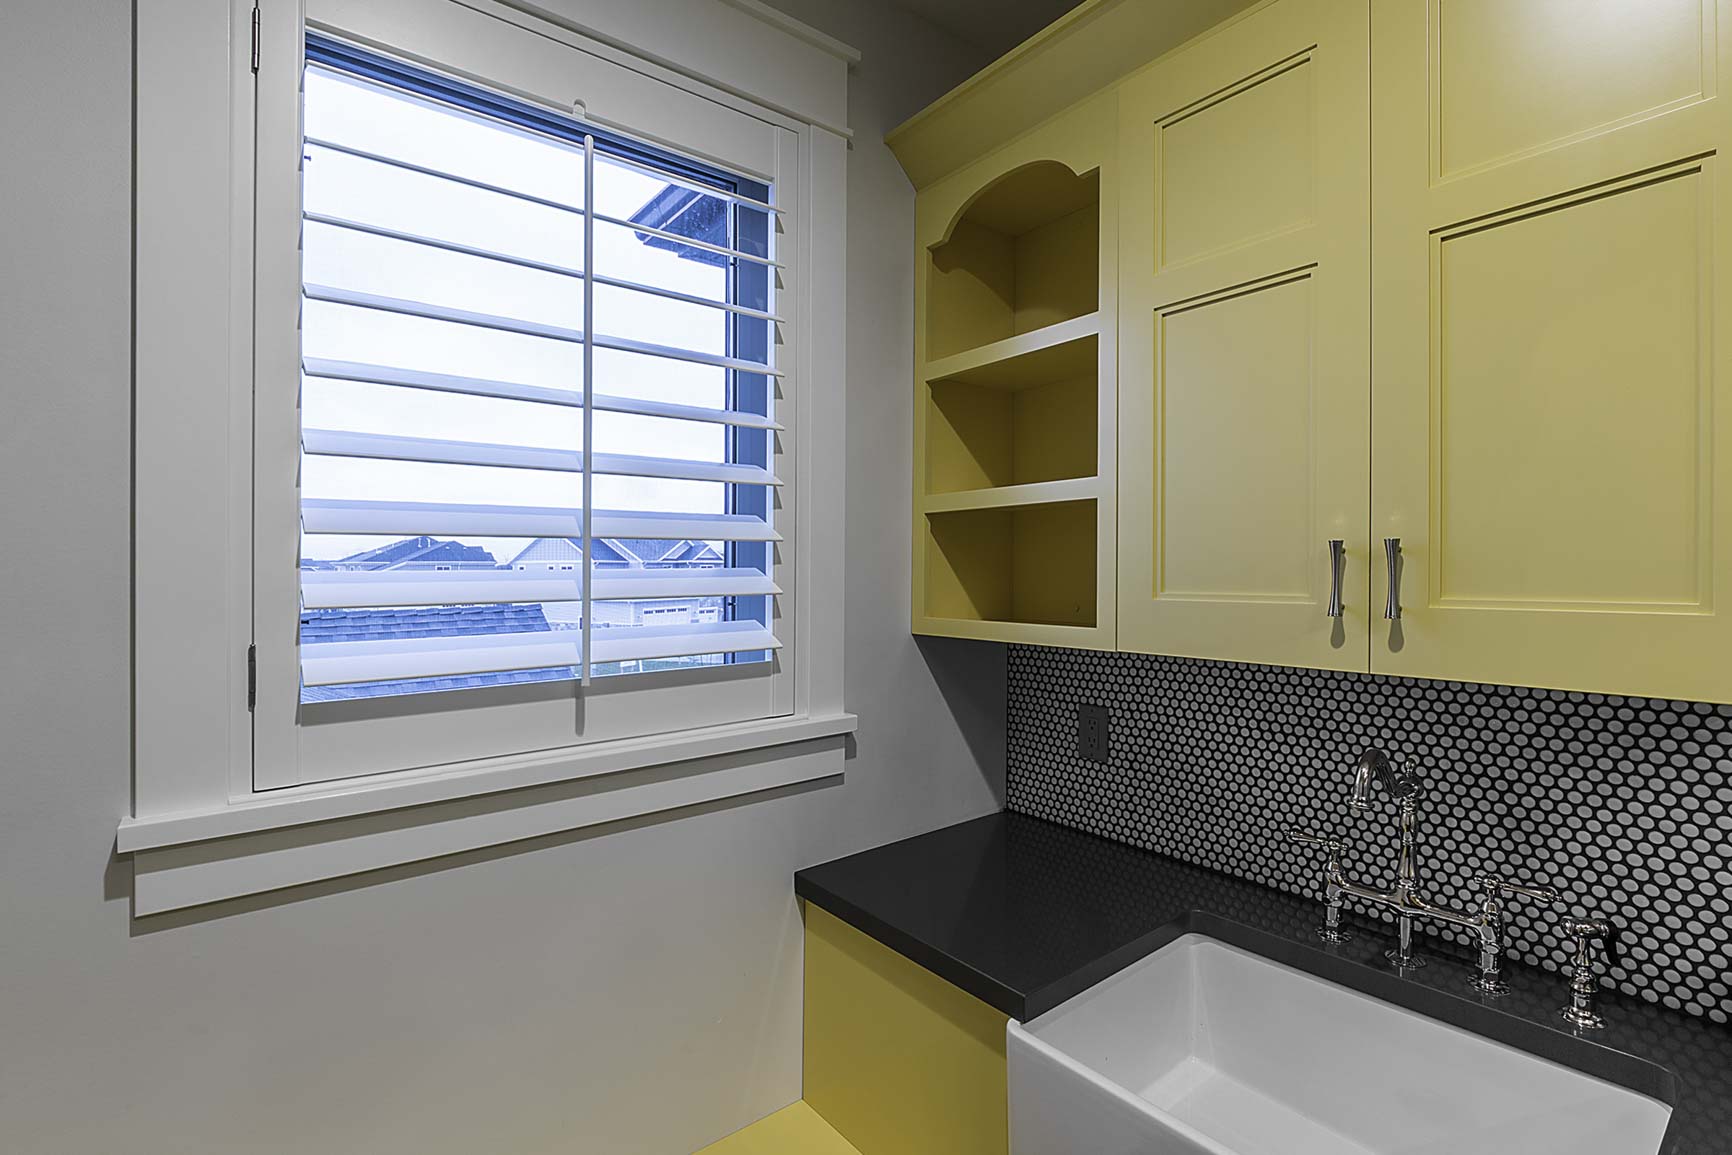 high quality mdf shutters in a kitchen crafted by Wasatch Shutter Design.